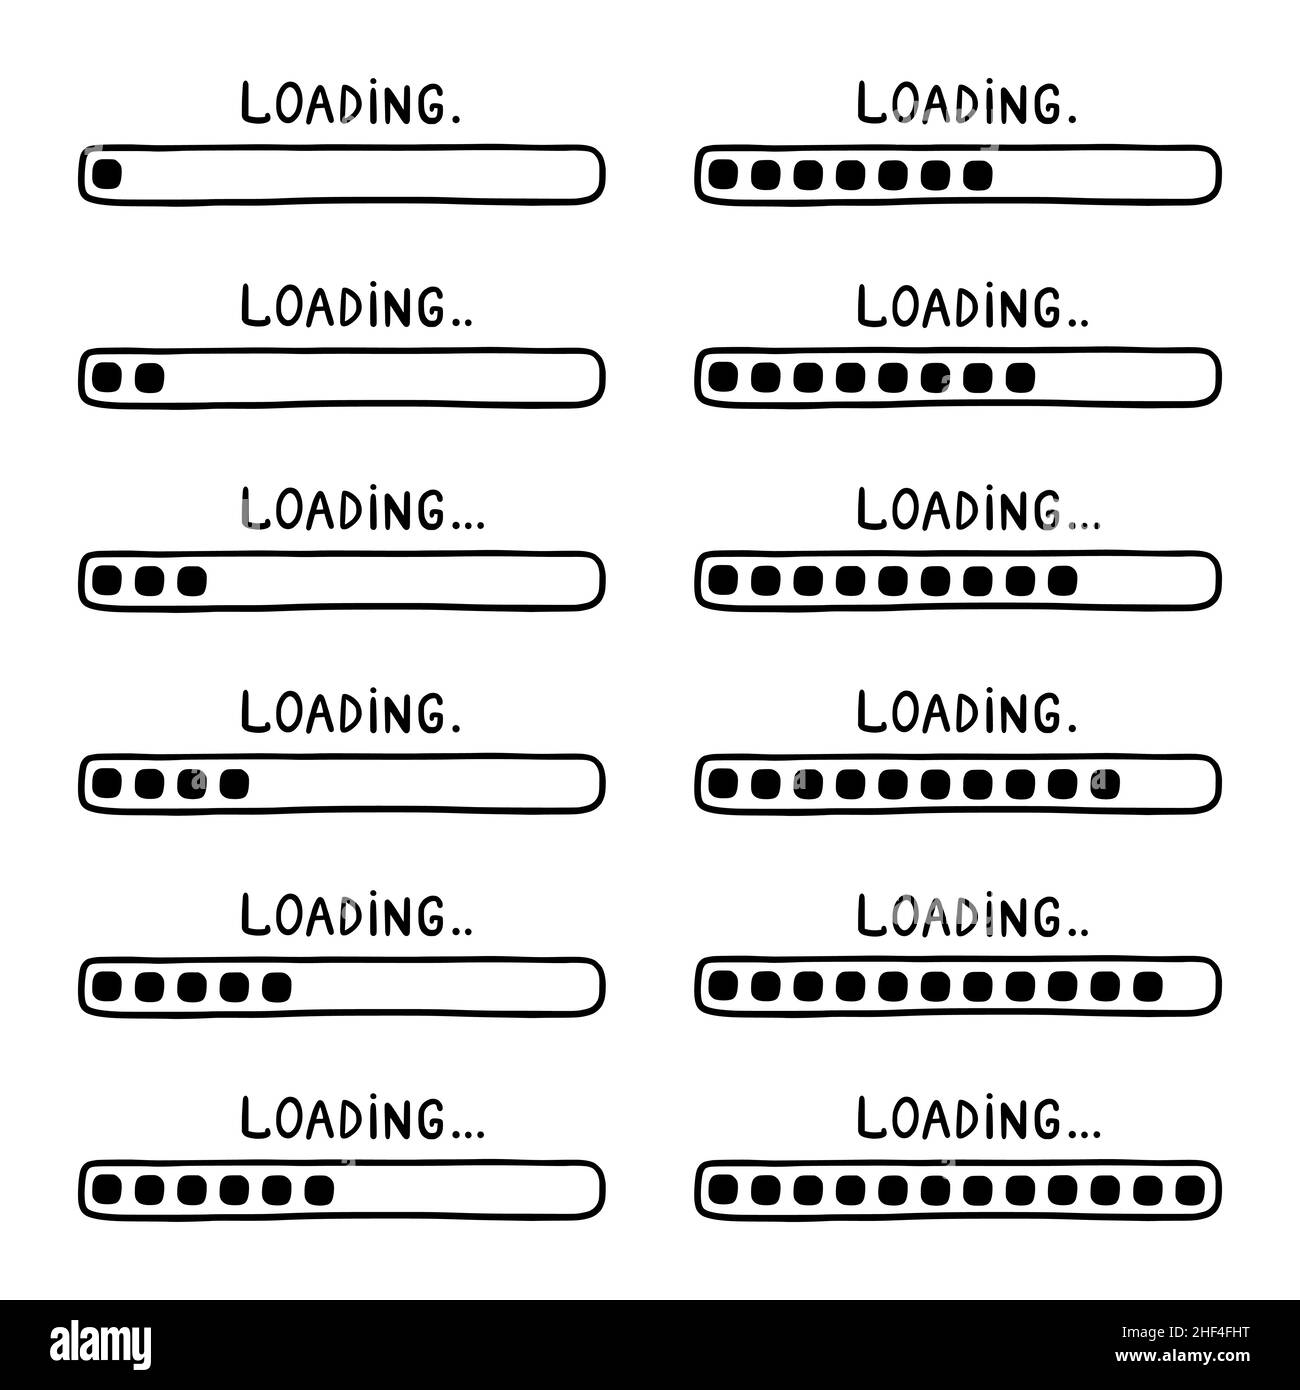 Loading bar, status and progress for animation. Doodle elements. Sketch, hand drawn style. Vector illustration. Stock Vector